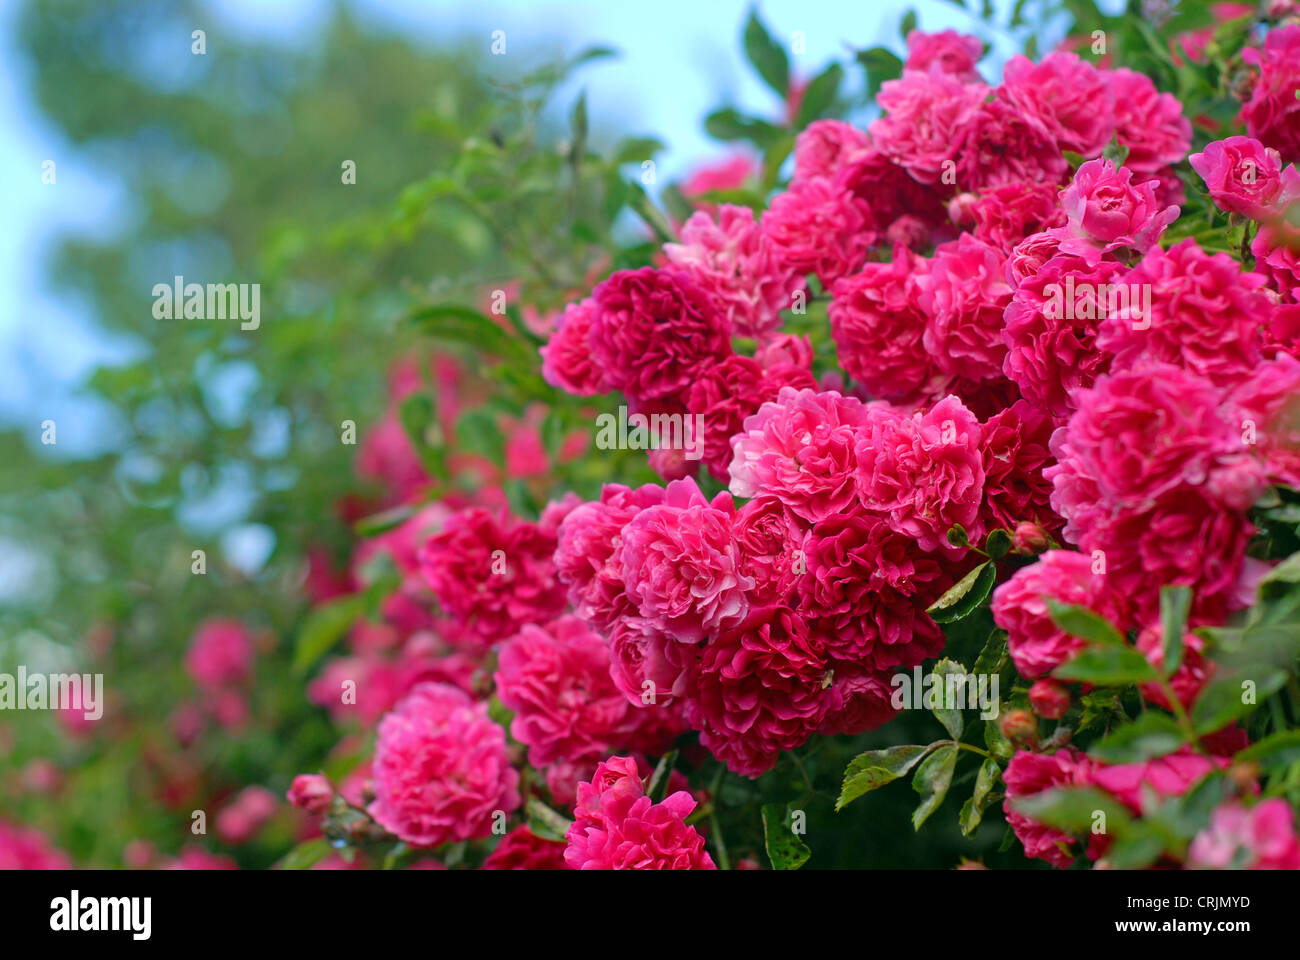 Pink and red summer roses on the vine. Stock Photo